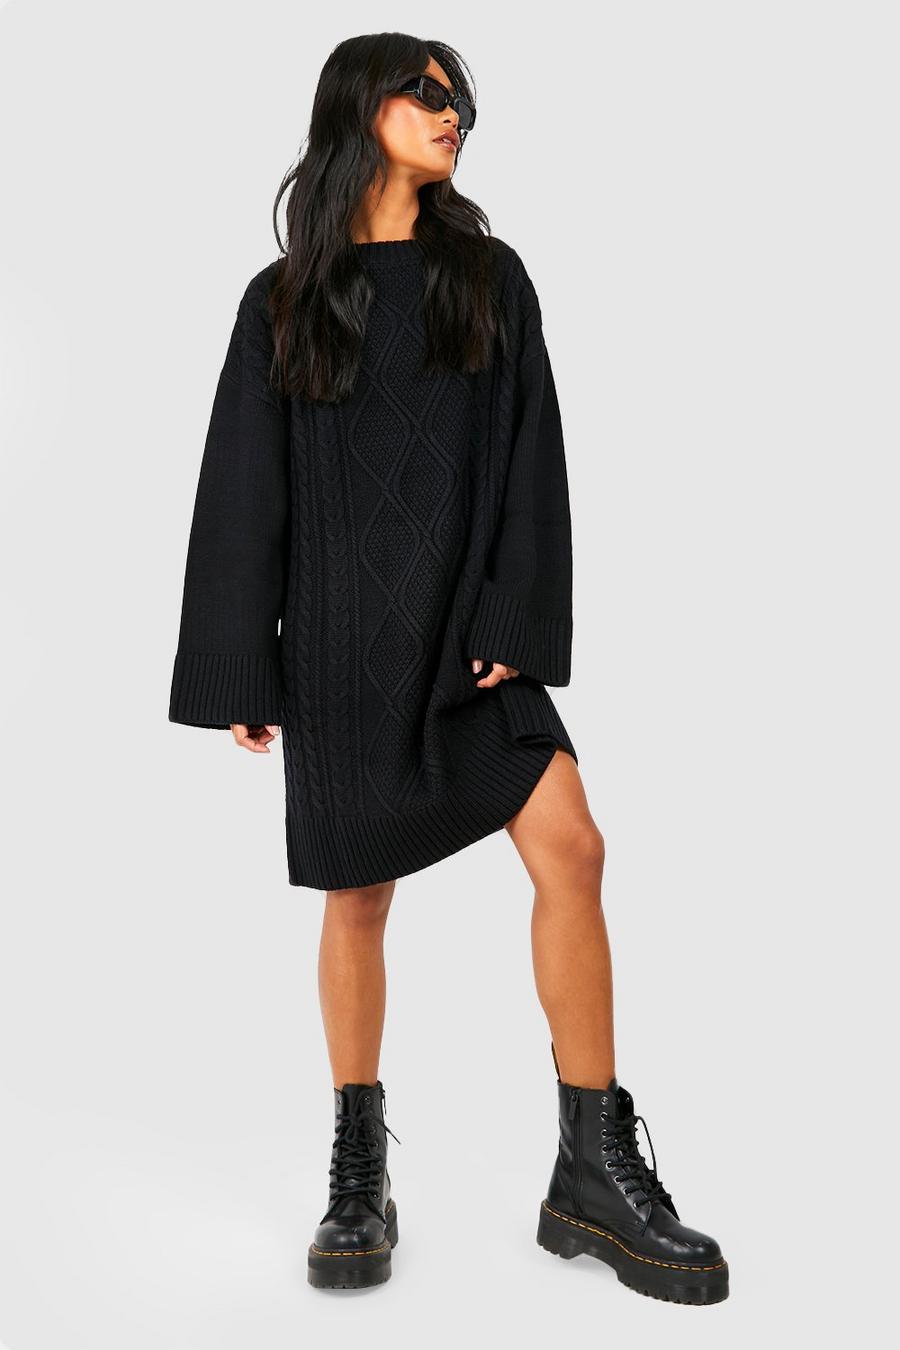 Black Chunky Oversized Cable Knit Sweater Dress